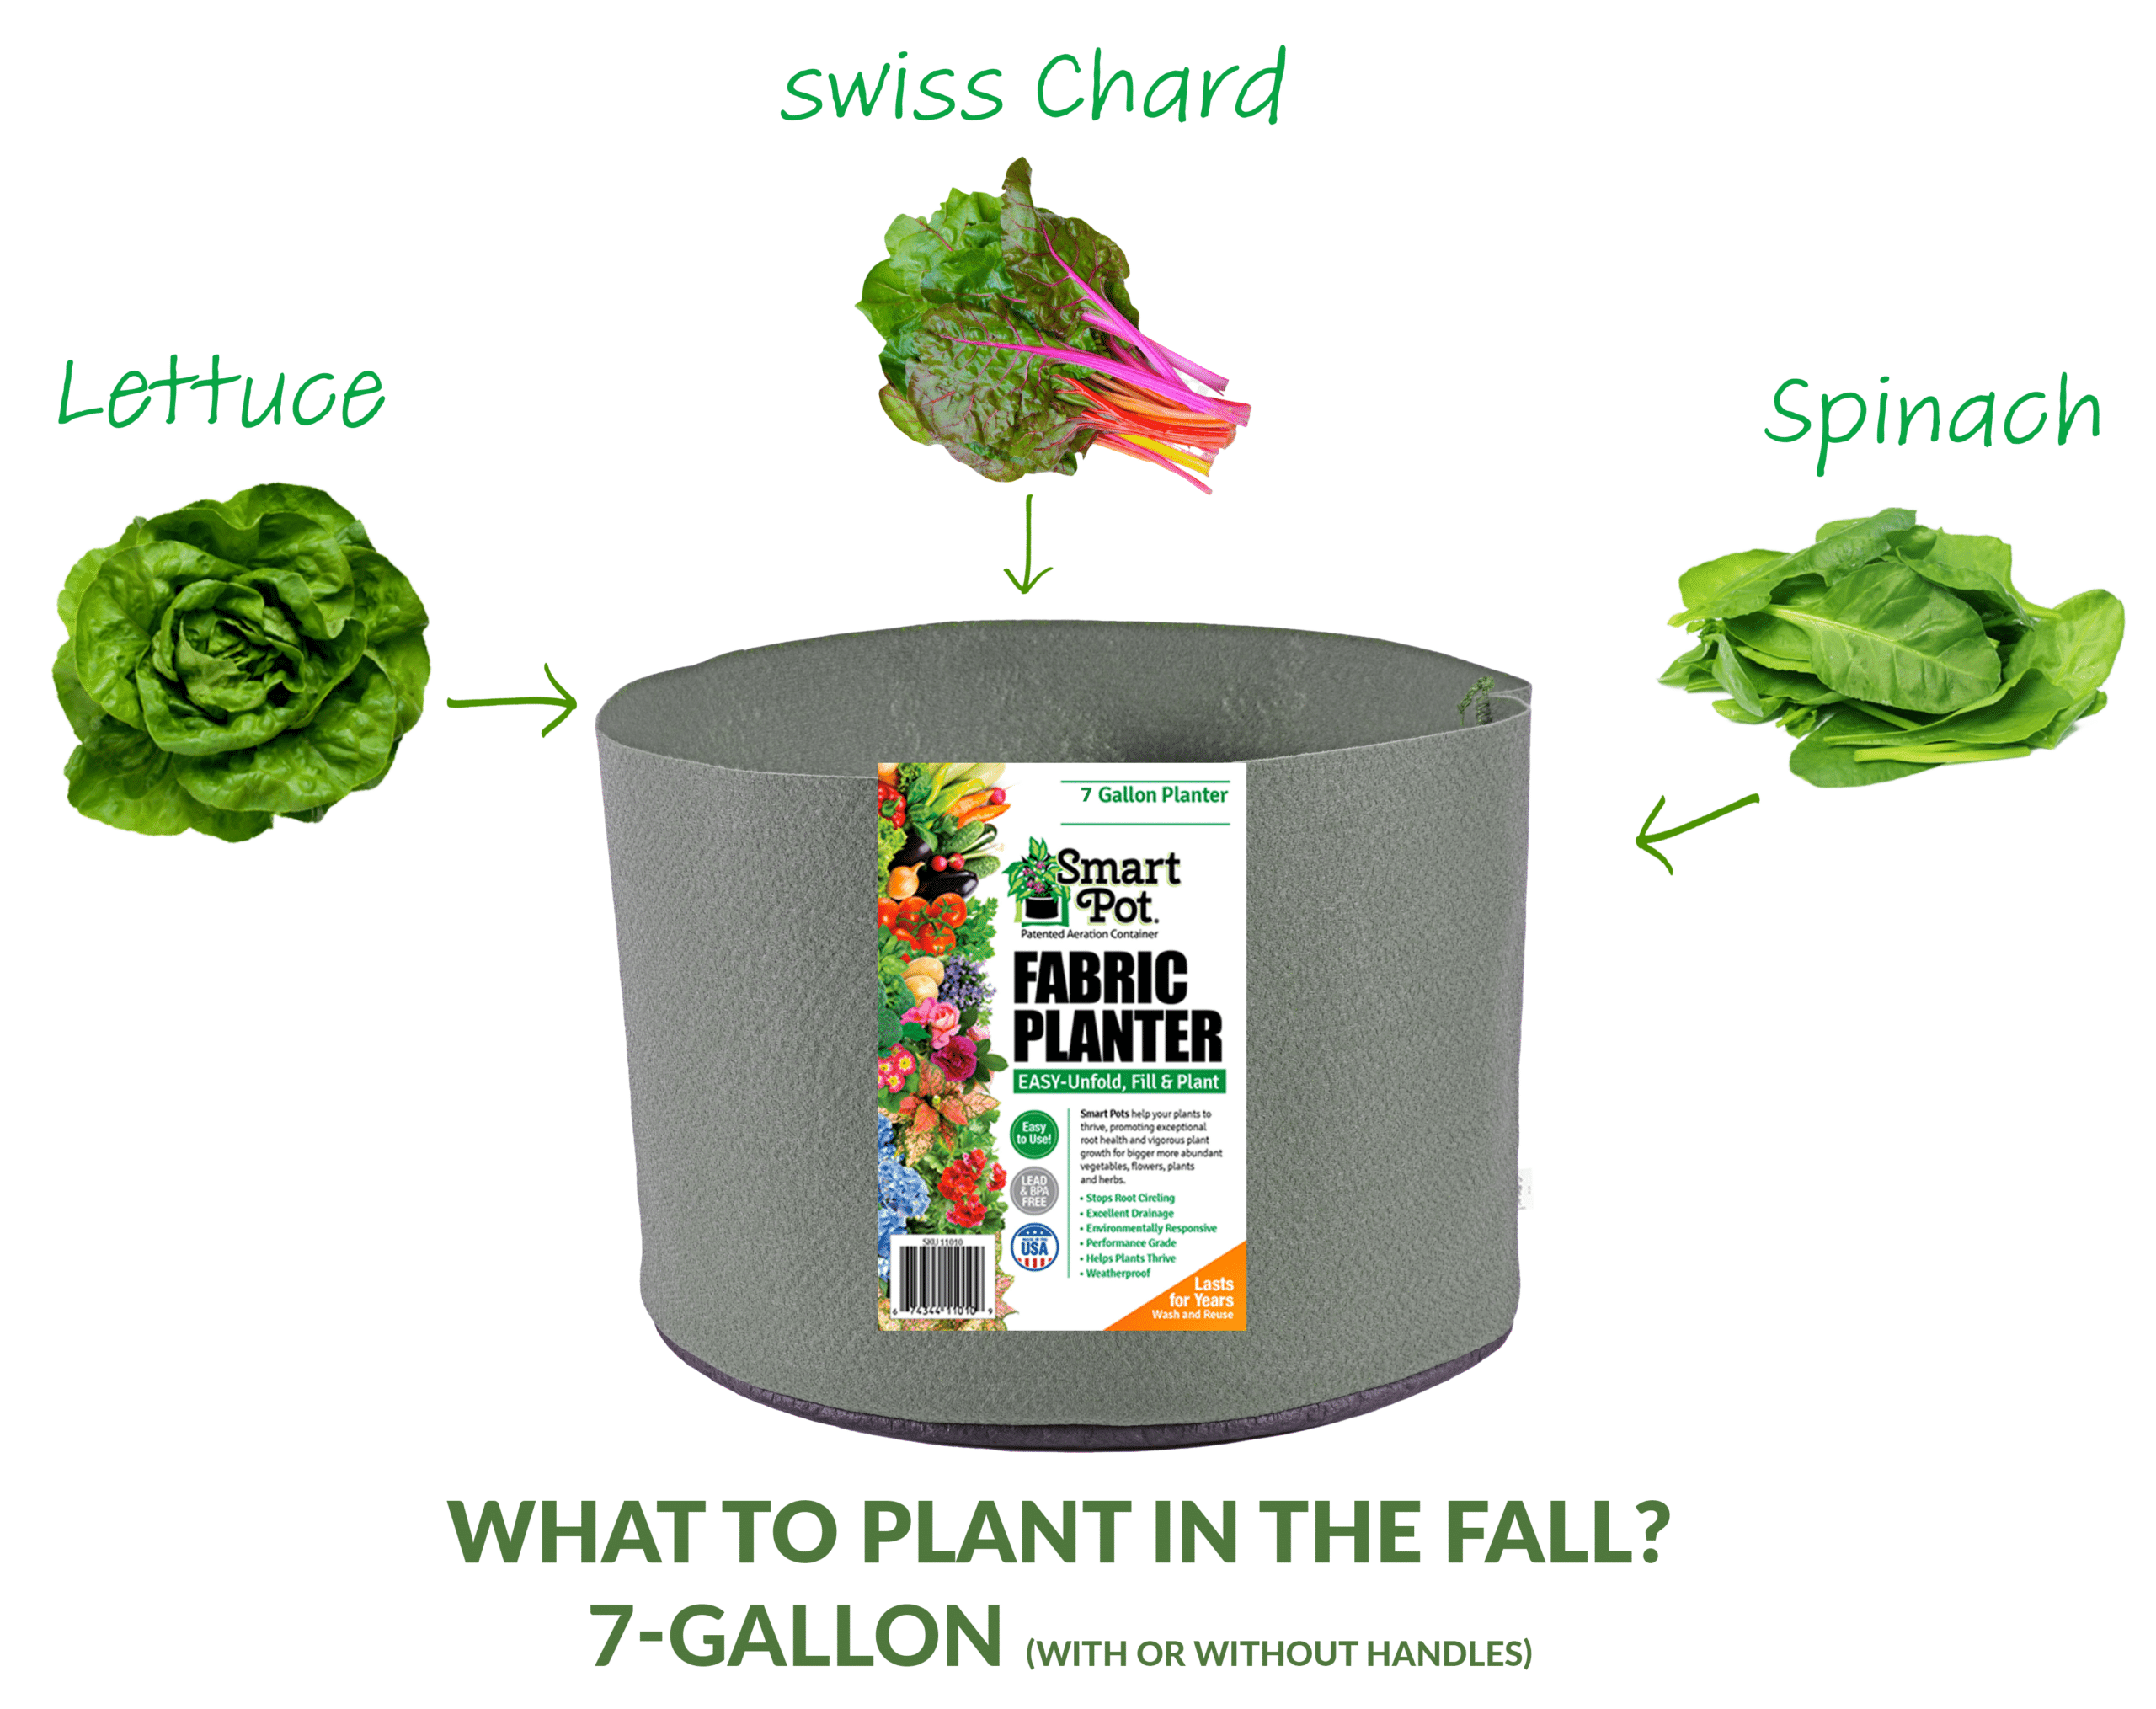 What to plant in a 7-gallon Smart Pot in Fall